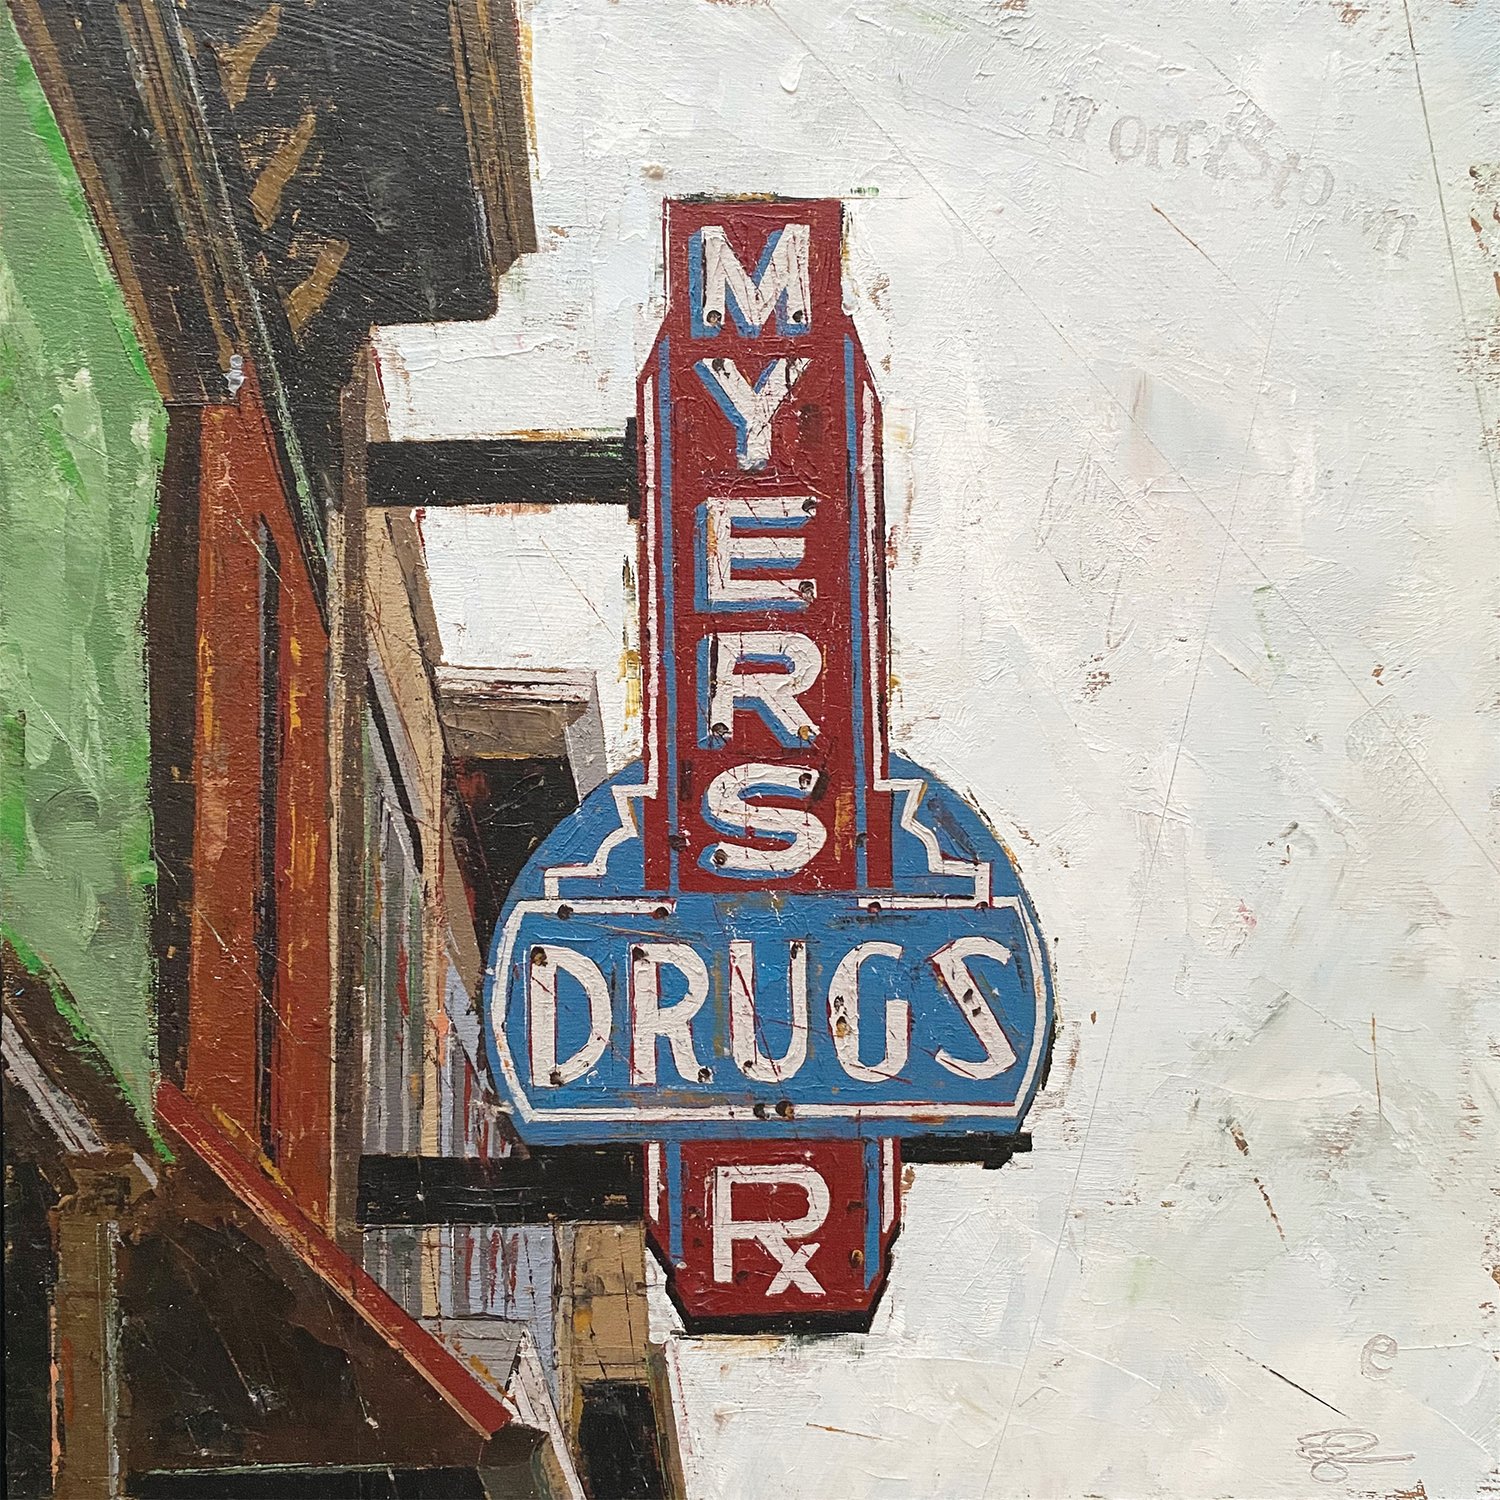 “Myers Drugs“ by Emily Thompson. The crisp edges of architectural details contrast with the ragged and layered abstracted sky.